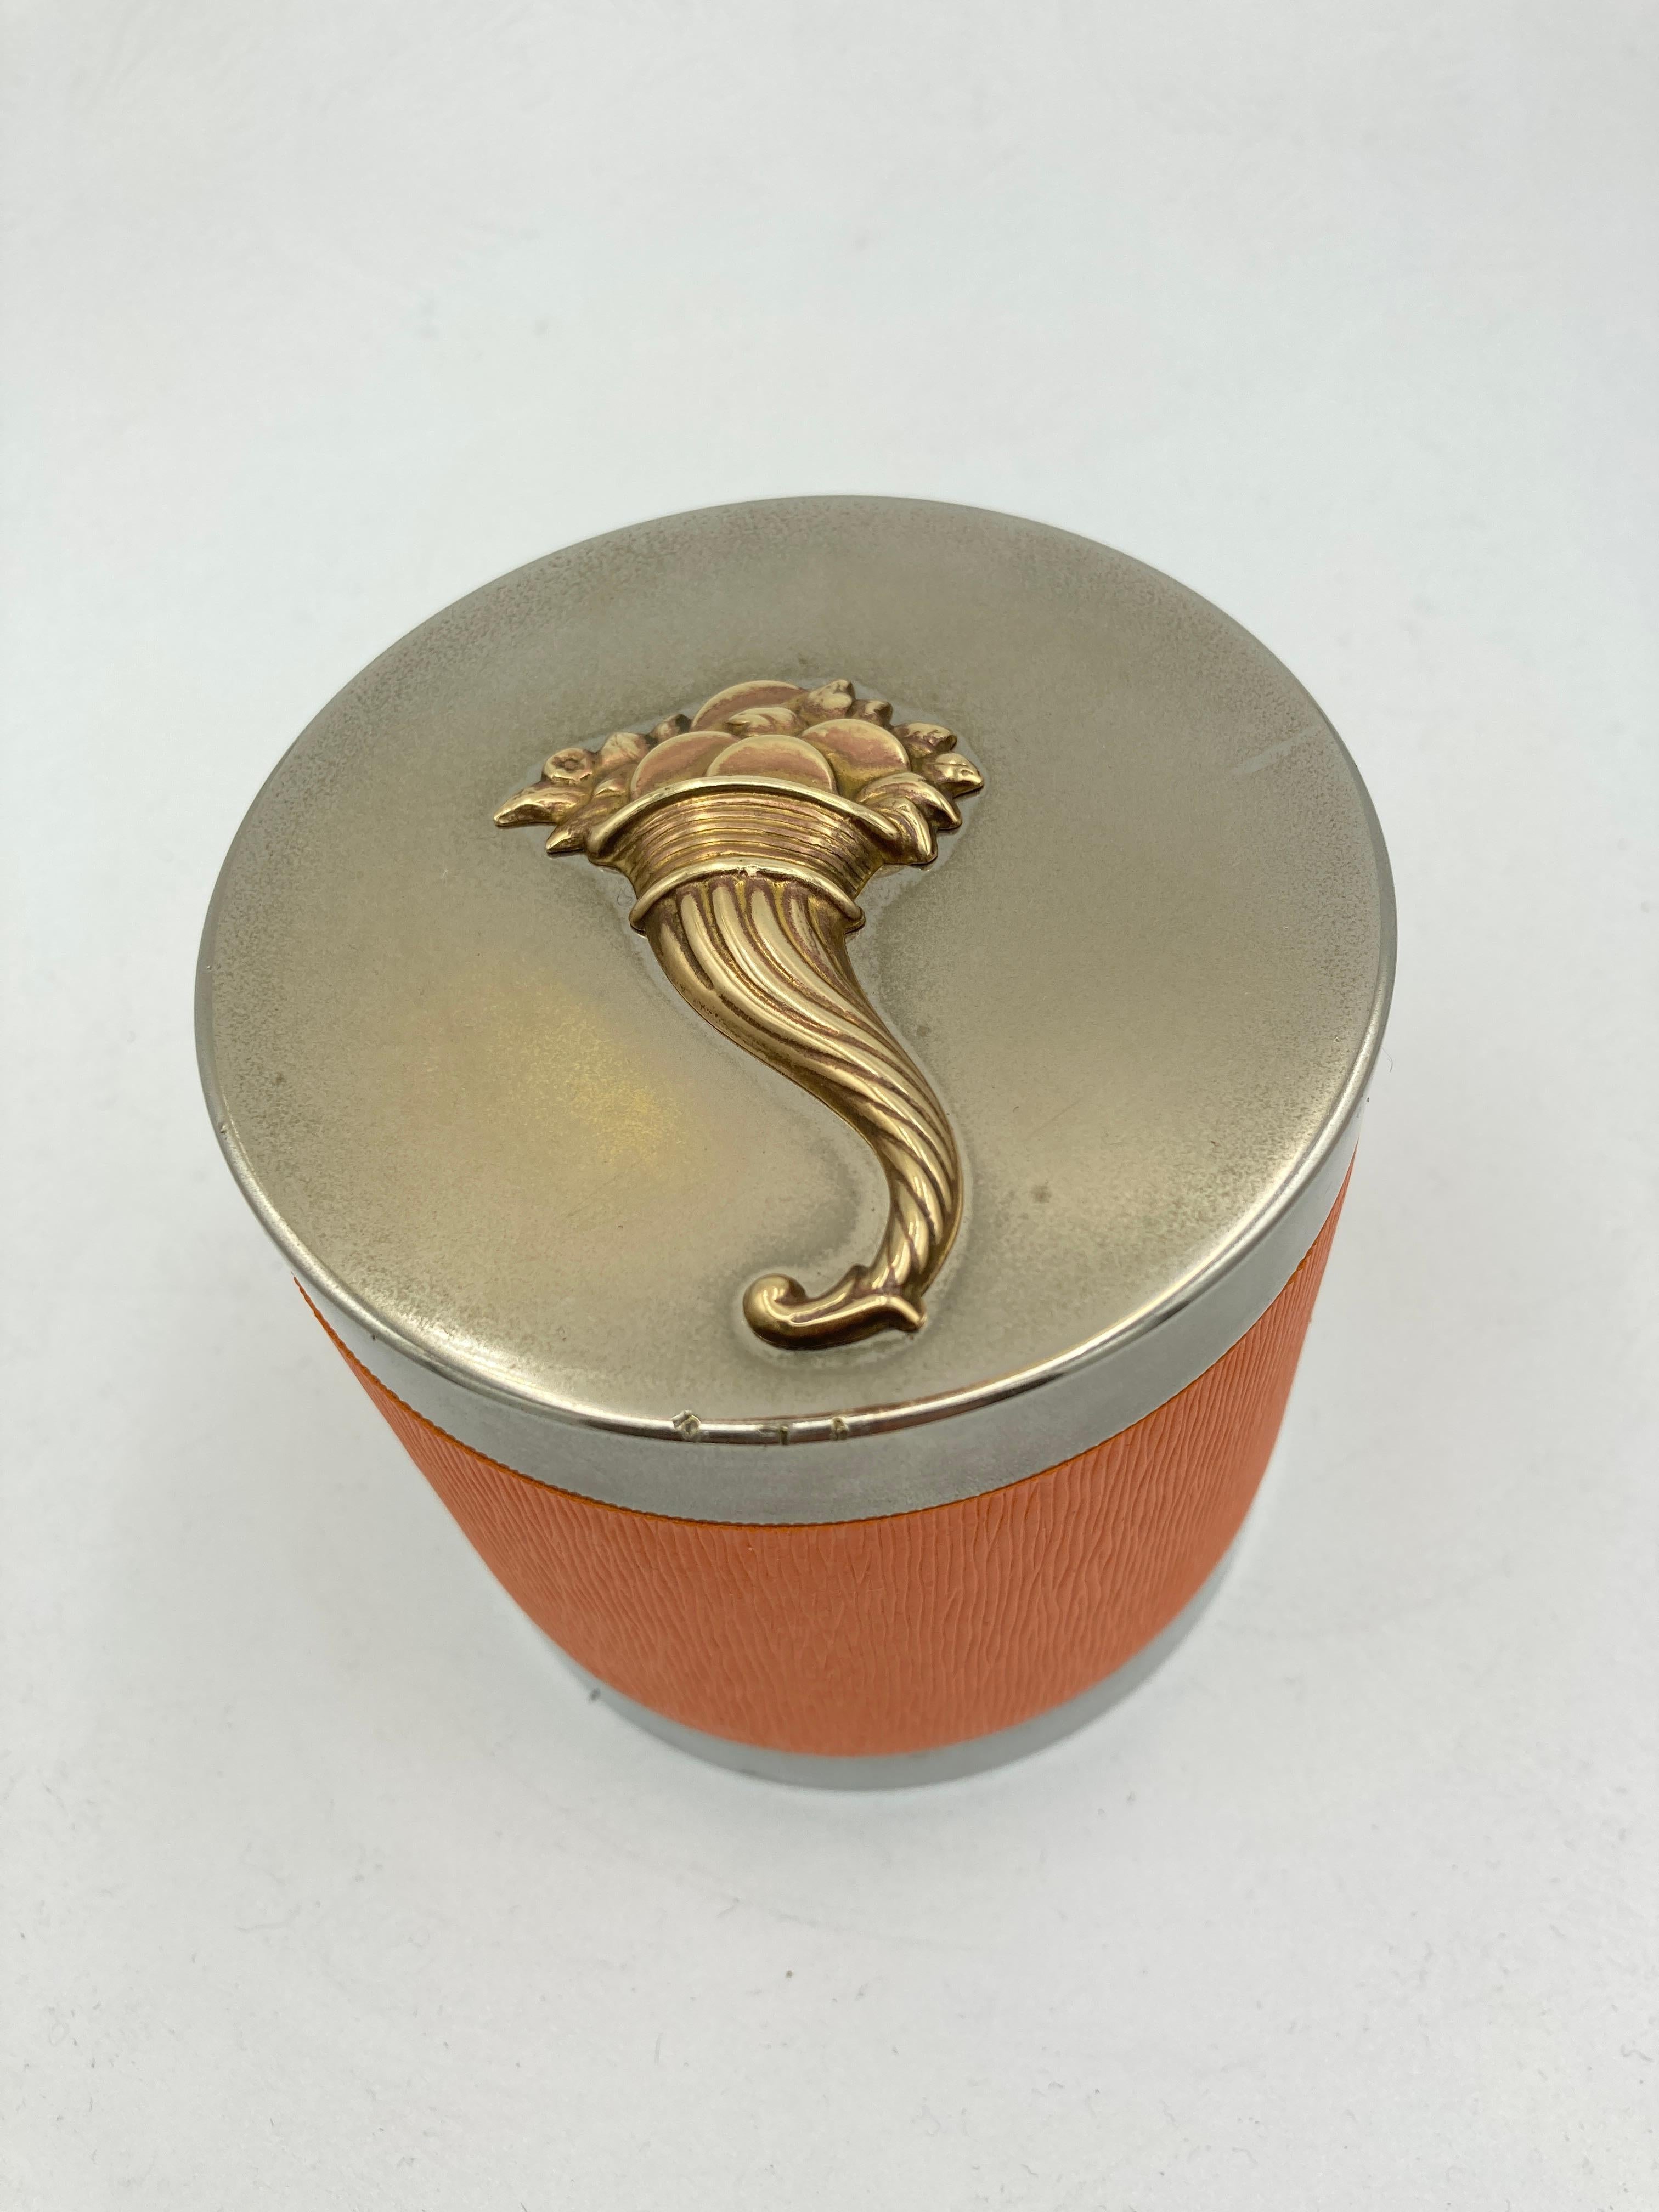 Very nice cigaret  boxe with orange leather decorated with a horn of abundance
signed Hermes Paris